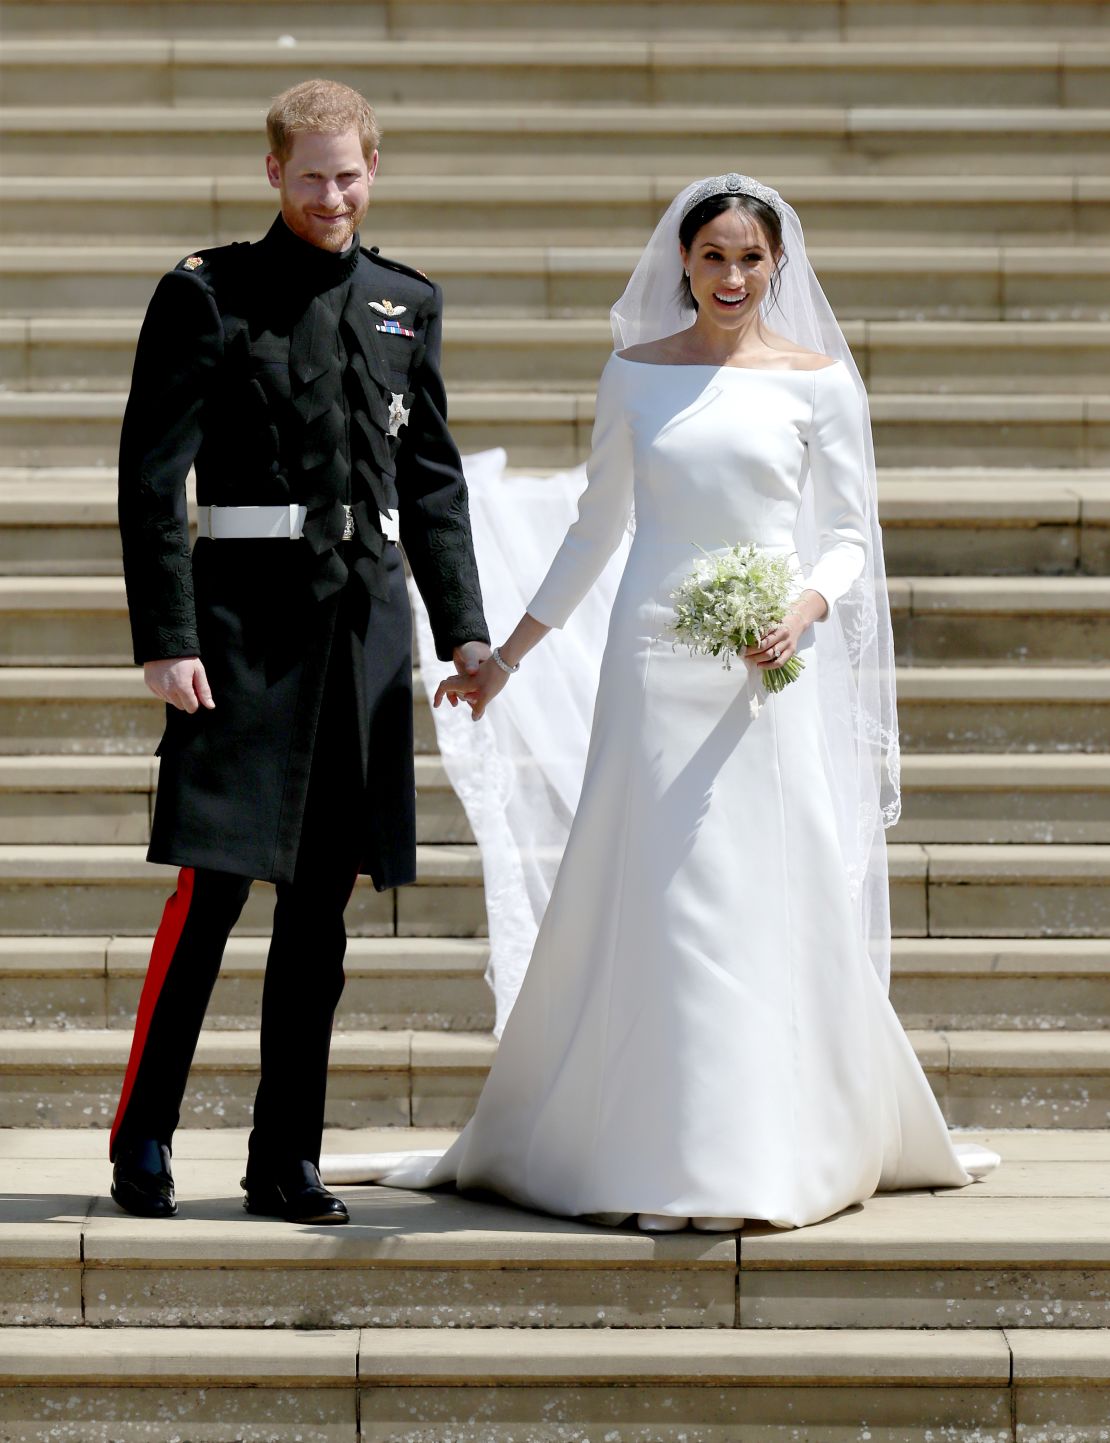 Meghan, Duchess of Sussex wore a Givenchy dress designed by Clare Waight Keller to marry Prince Harry, Duke of Sussex, in 2018.